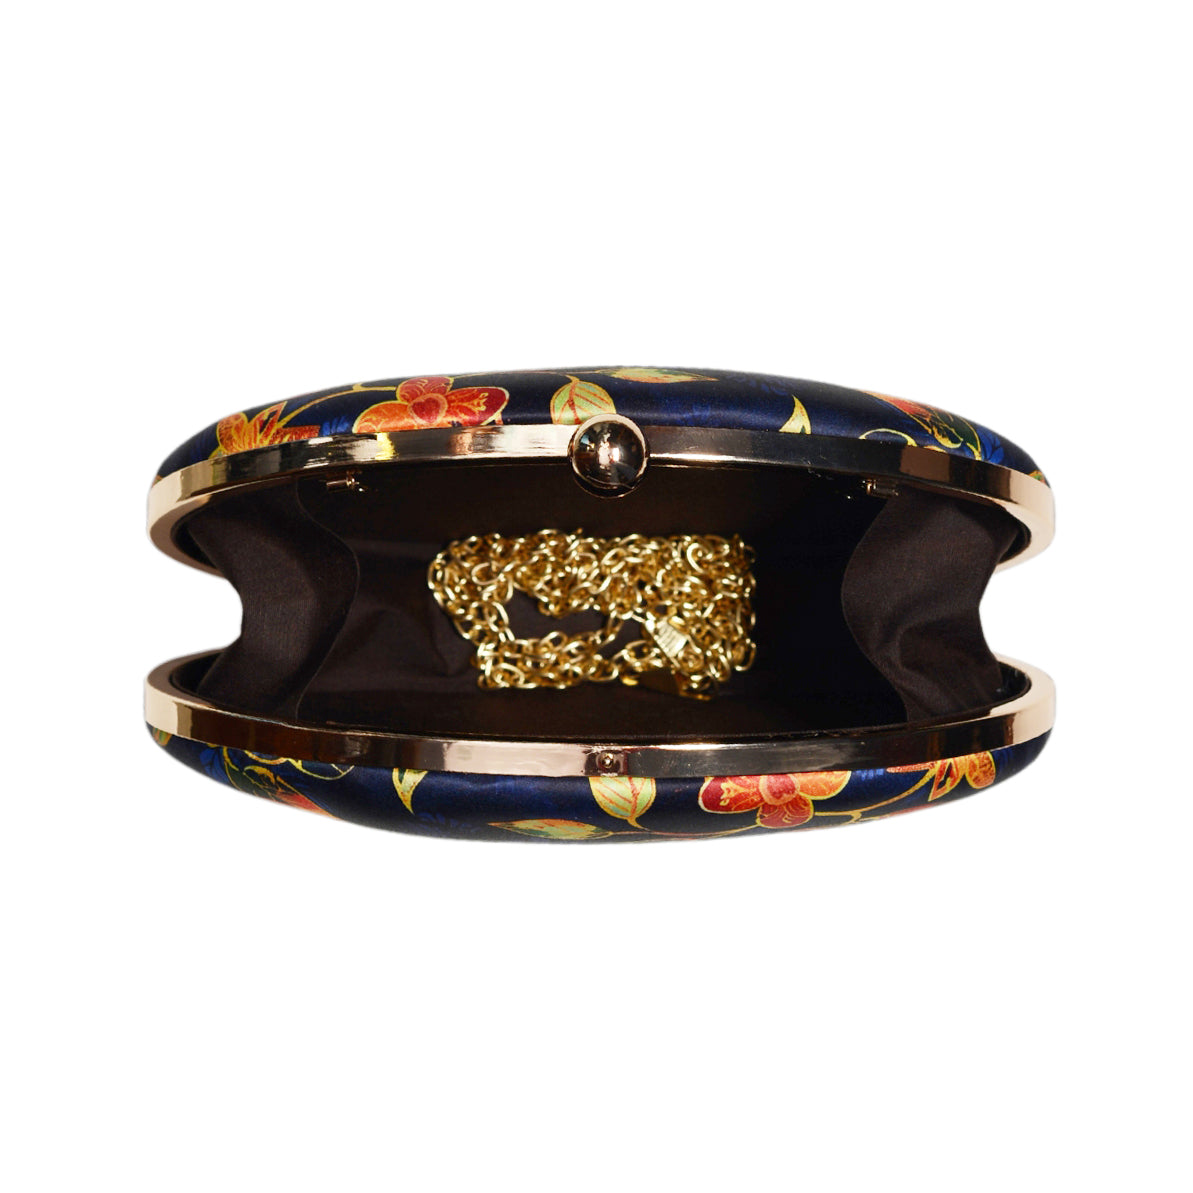 Blue And Yellow Floral Printed Oval Clutch